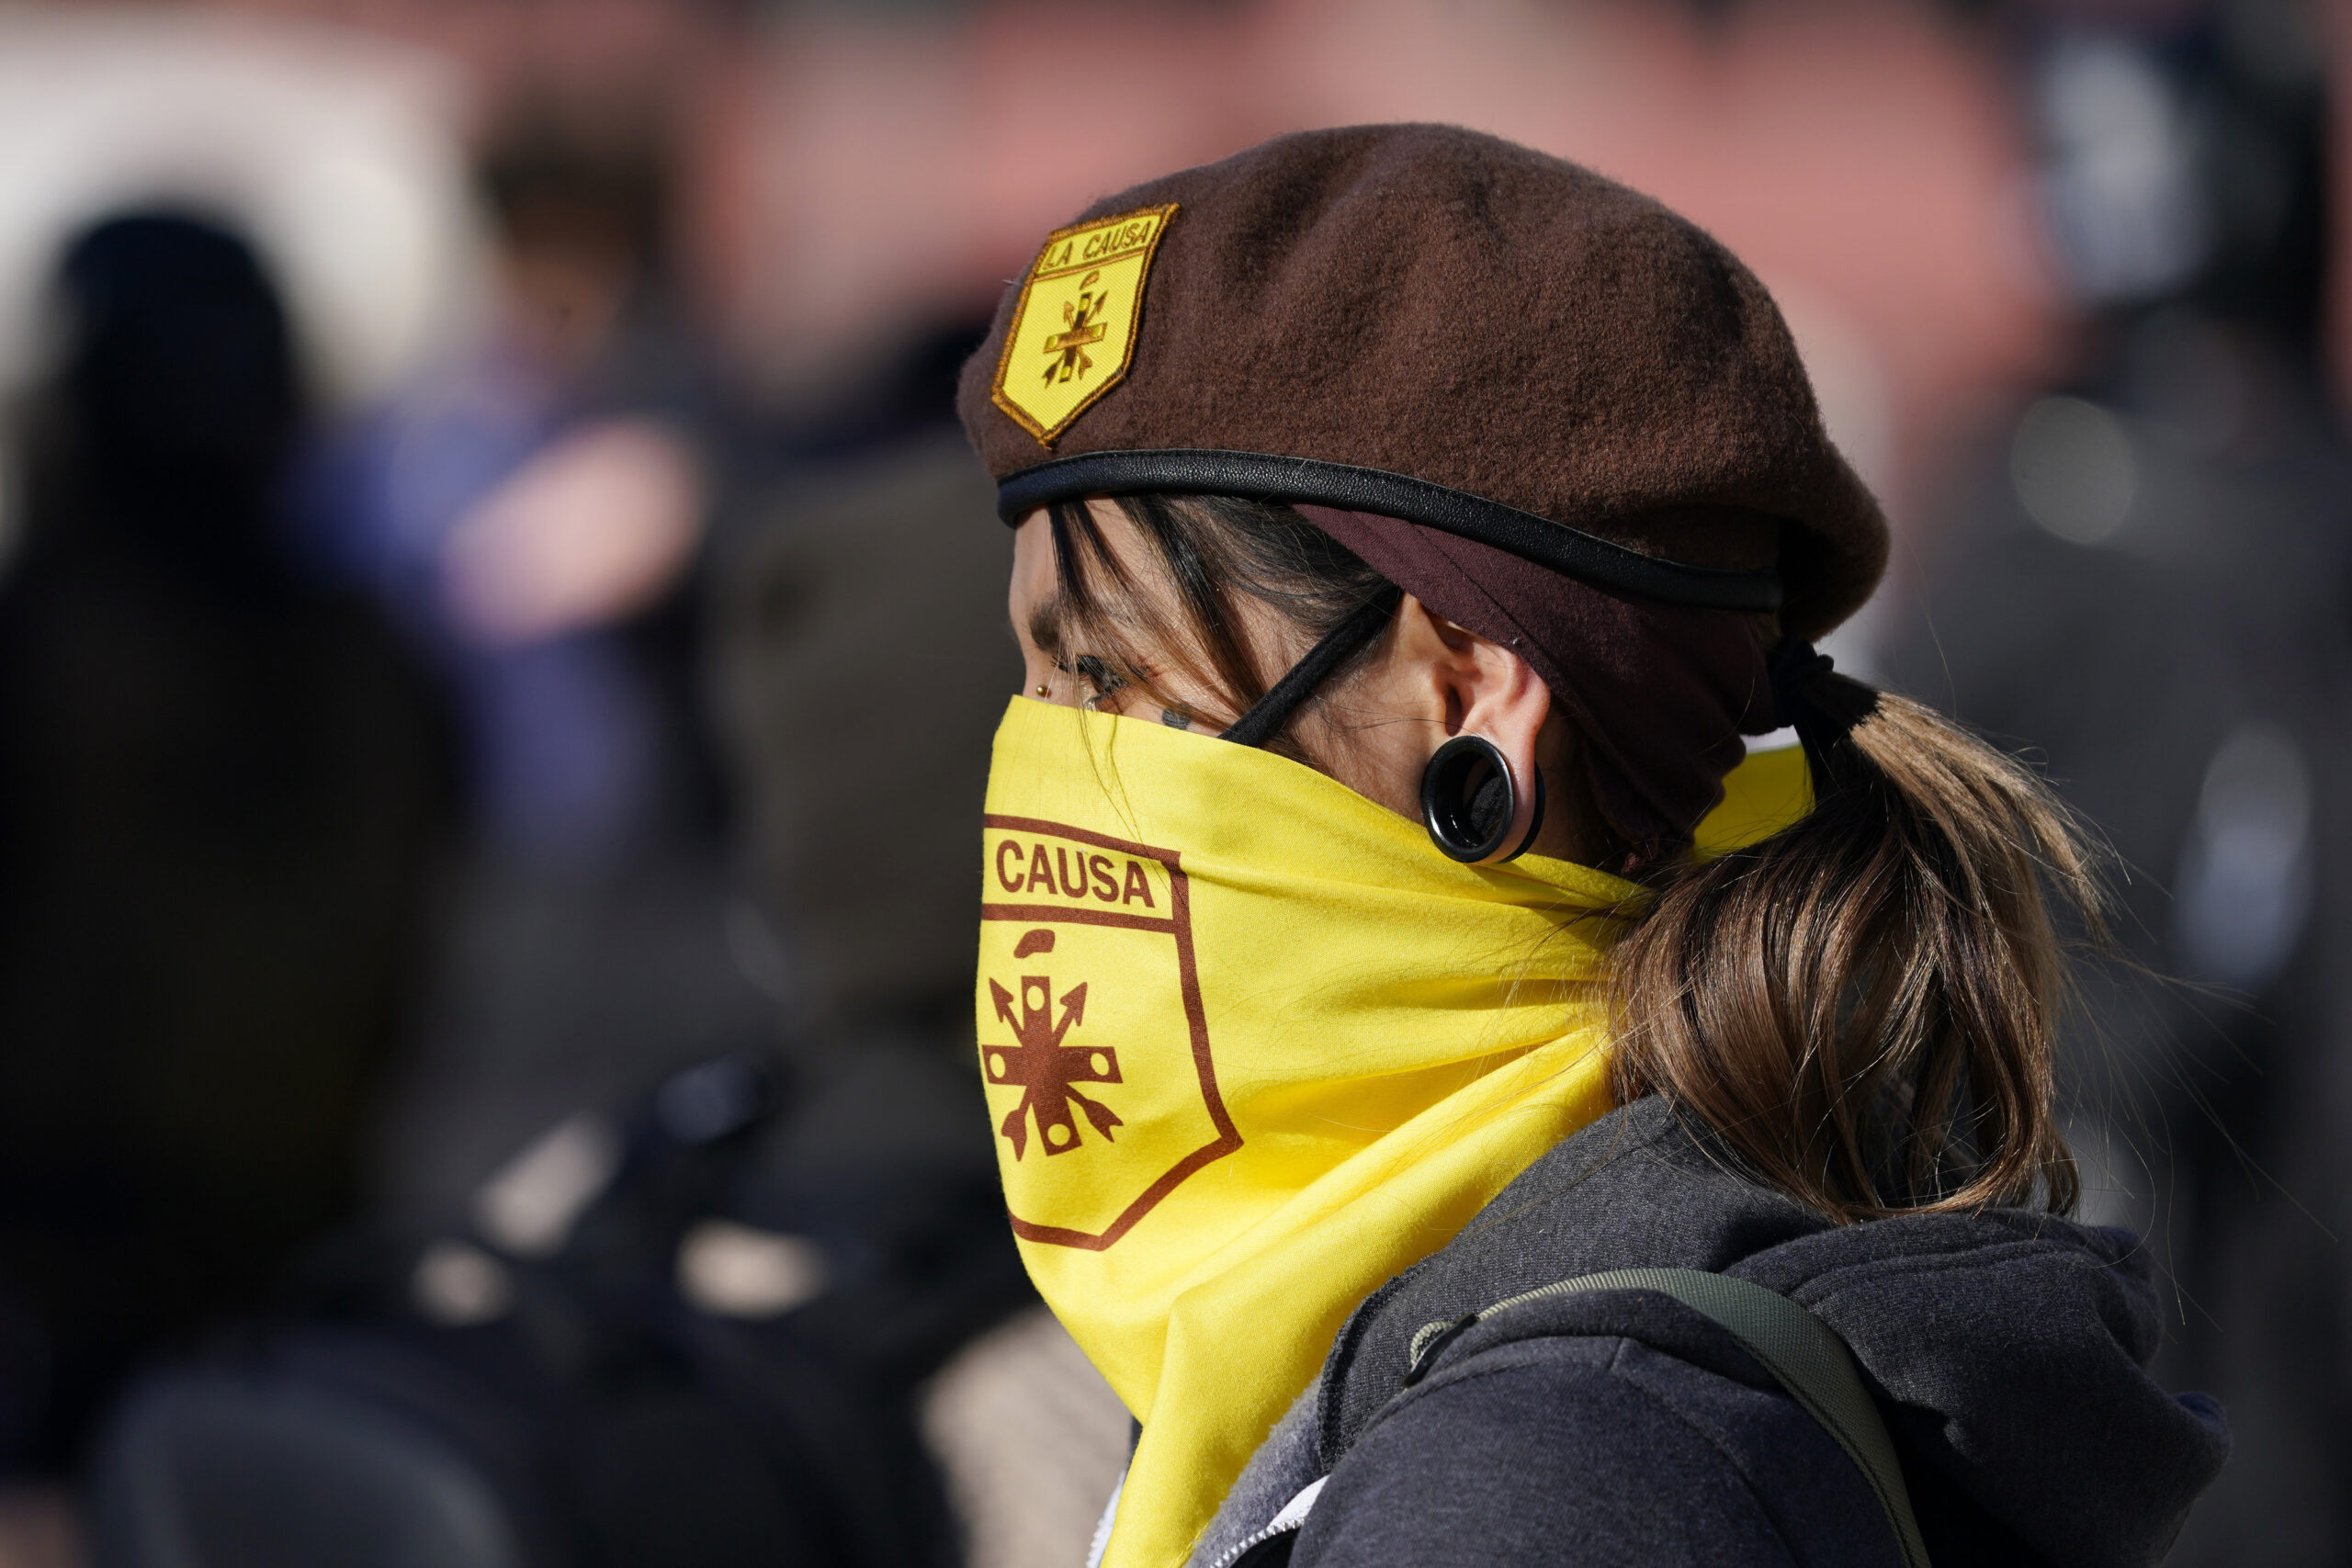 A member of the Brown Berets is shown from the side with a yellow face covering